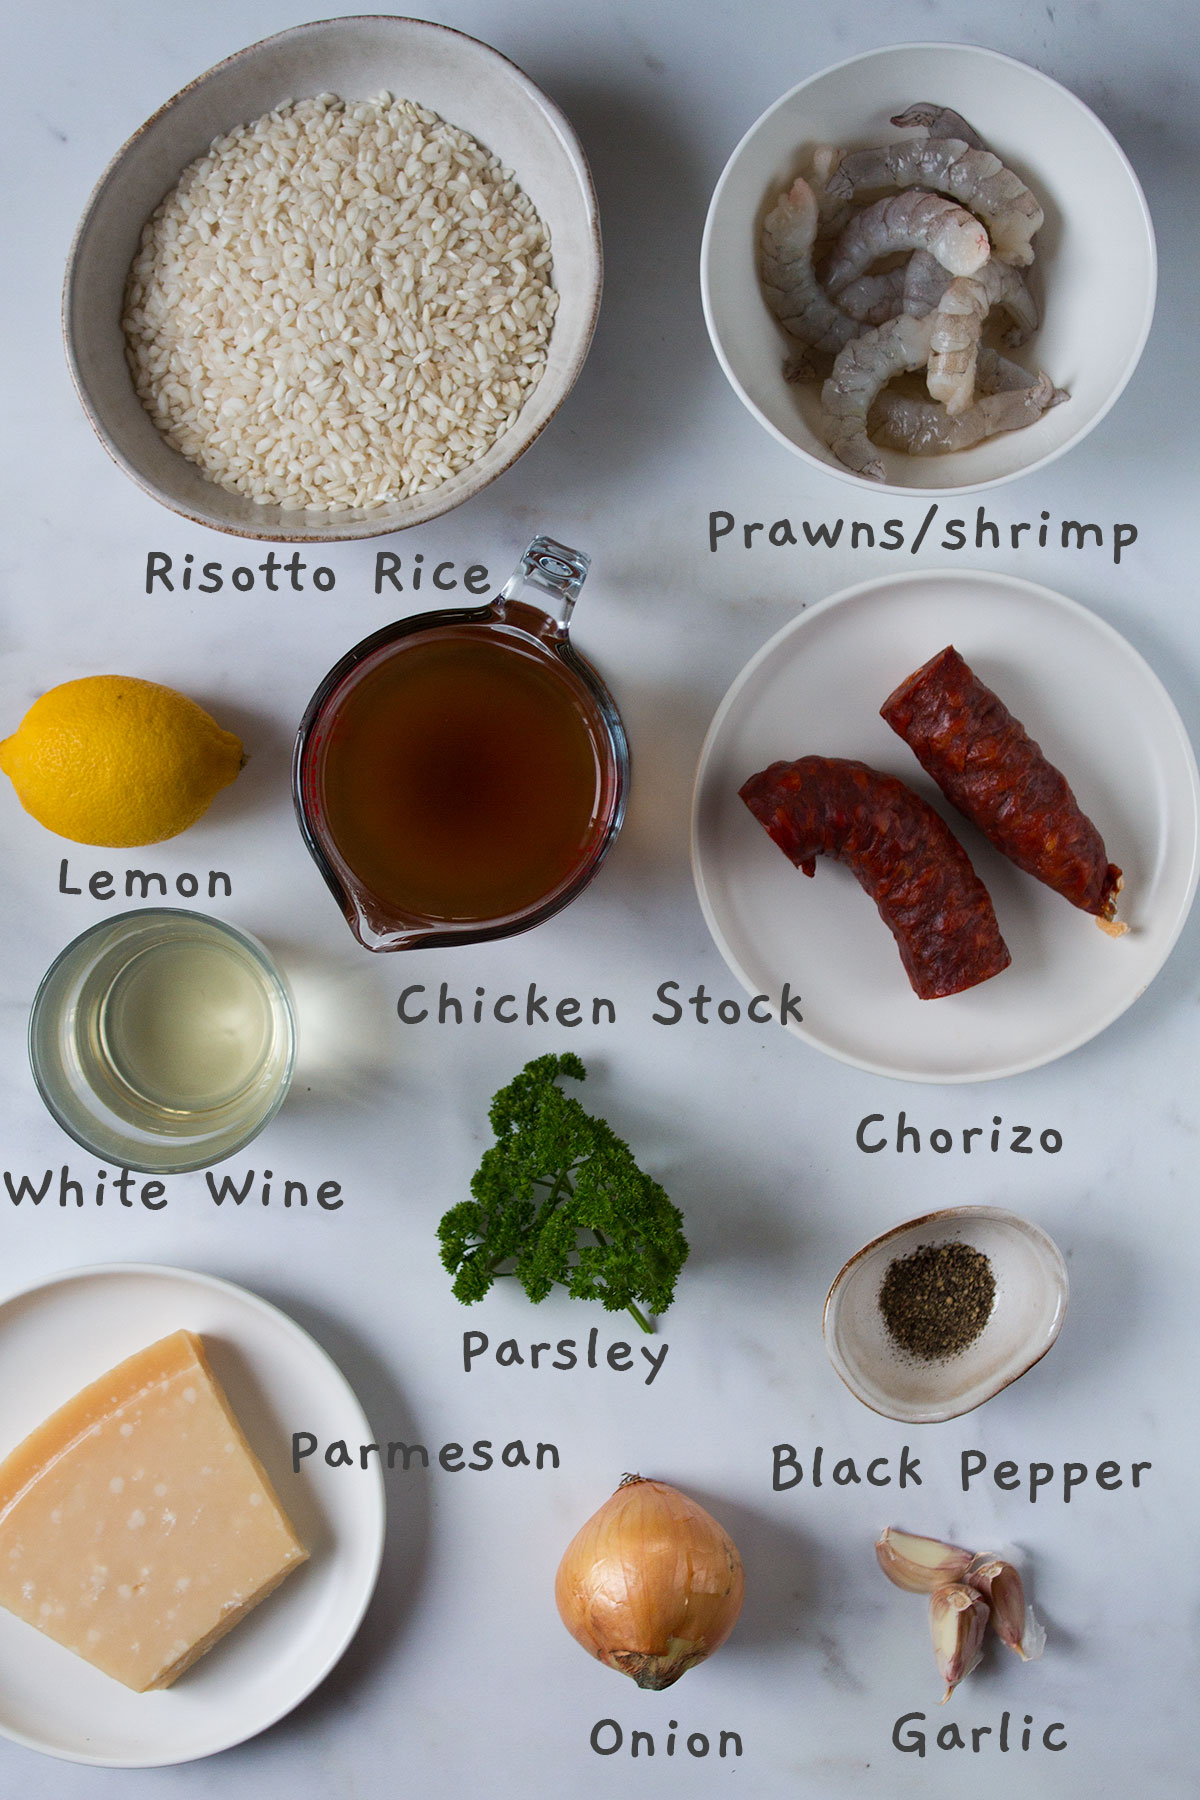 All ingredients laid out on a white background.